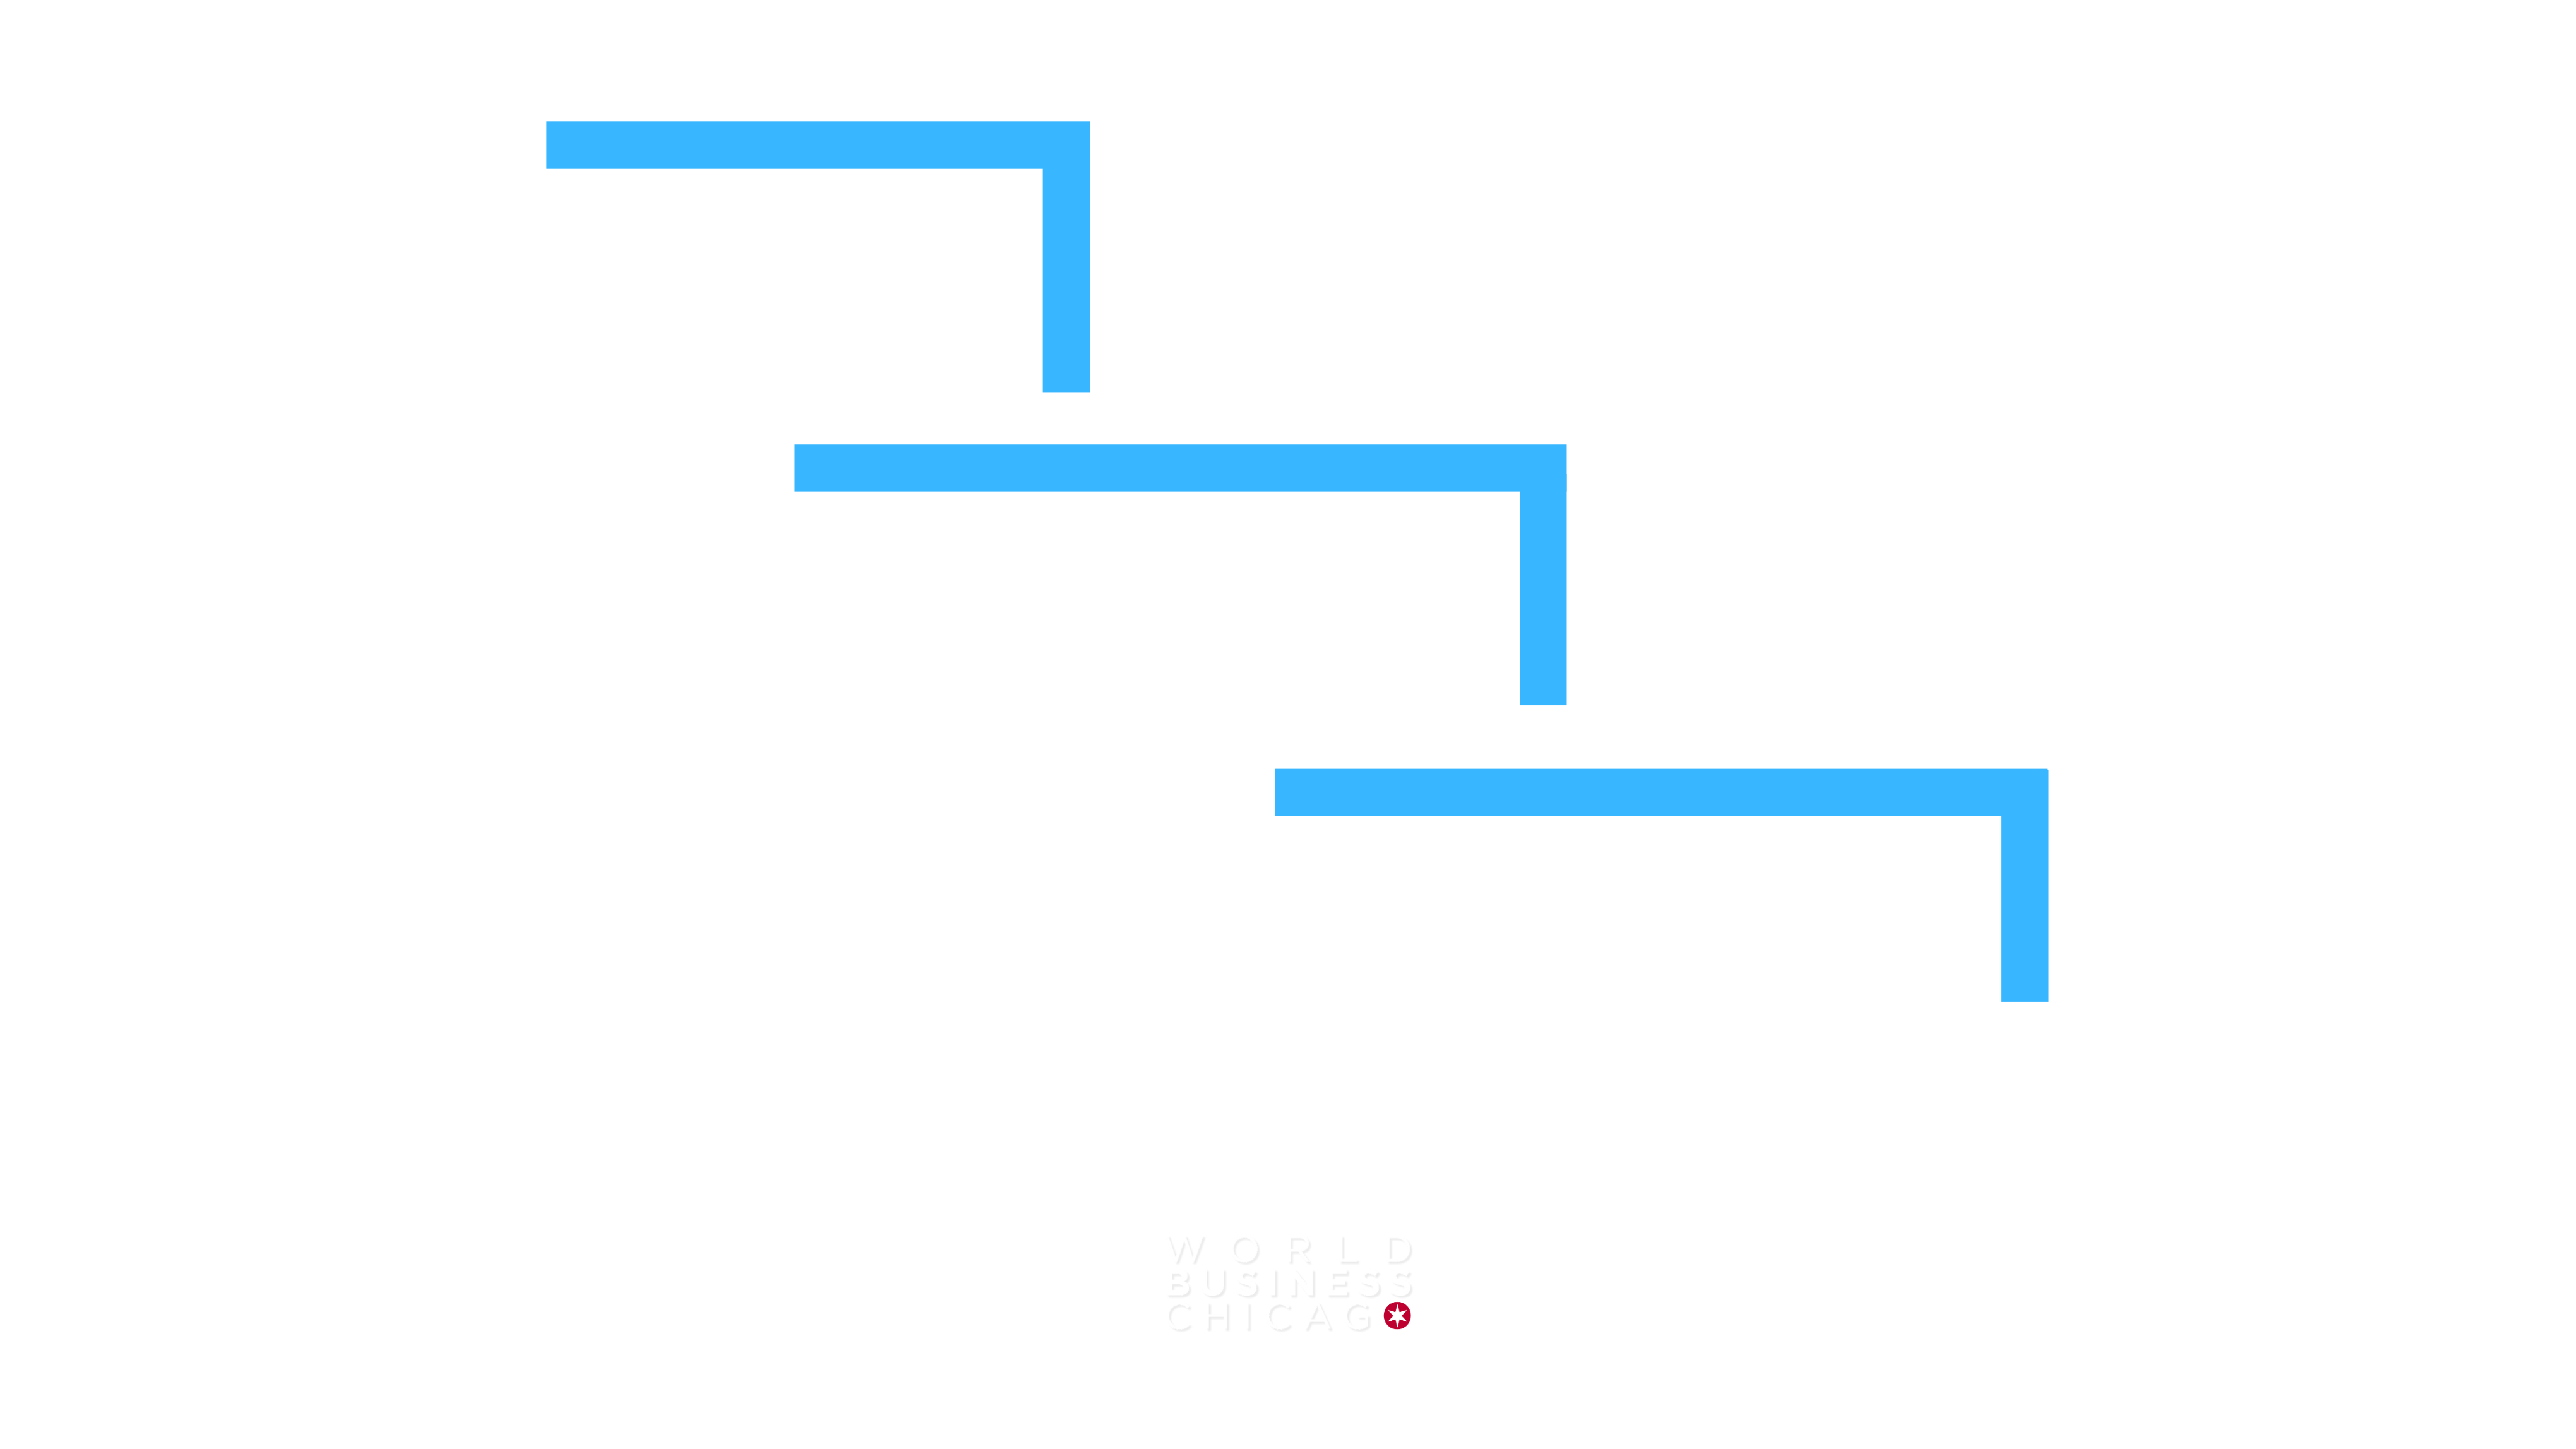 Chi capital accelerator world business chicago